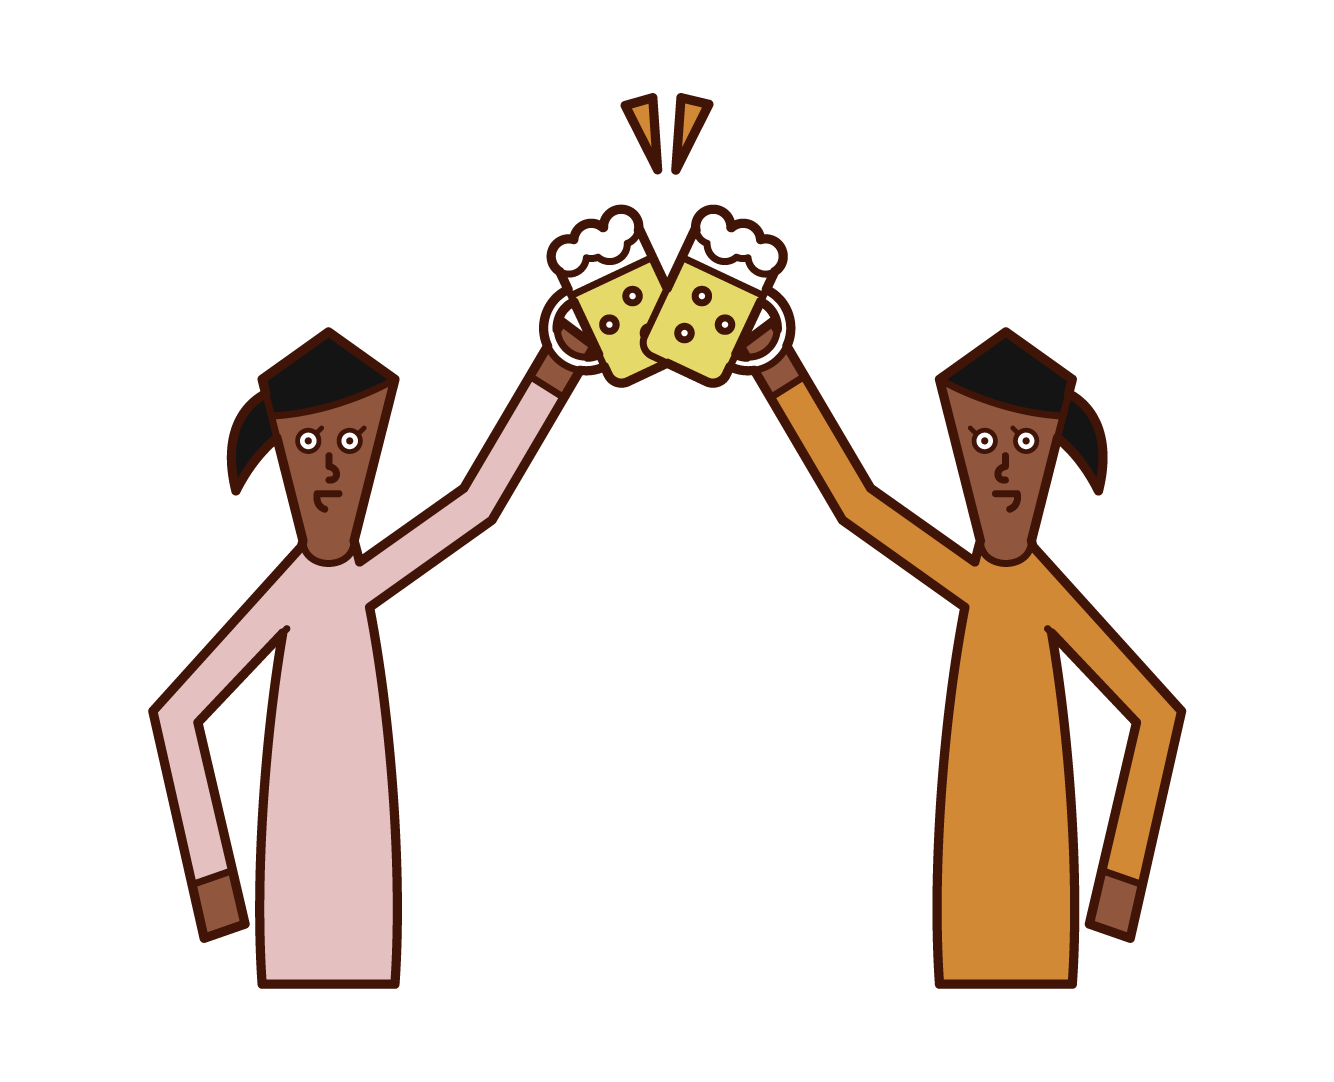 Illustration of people (women) toasting with beer